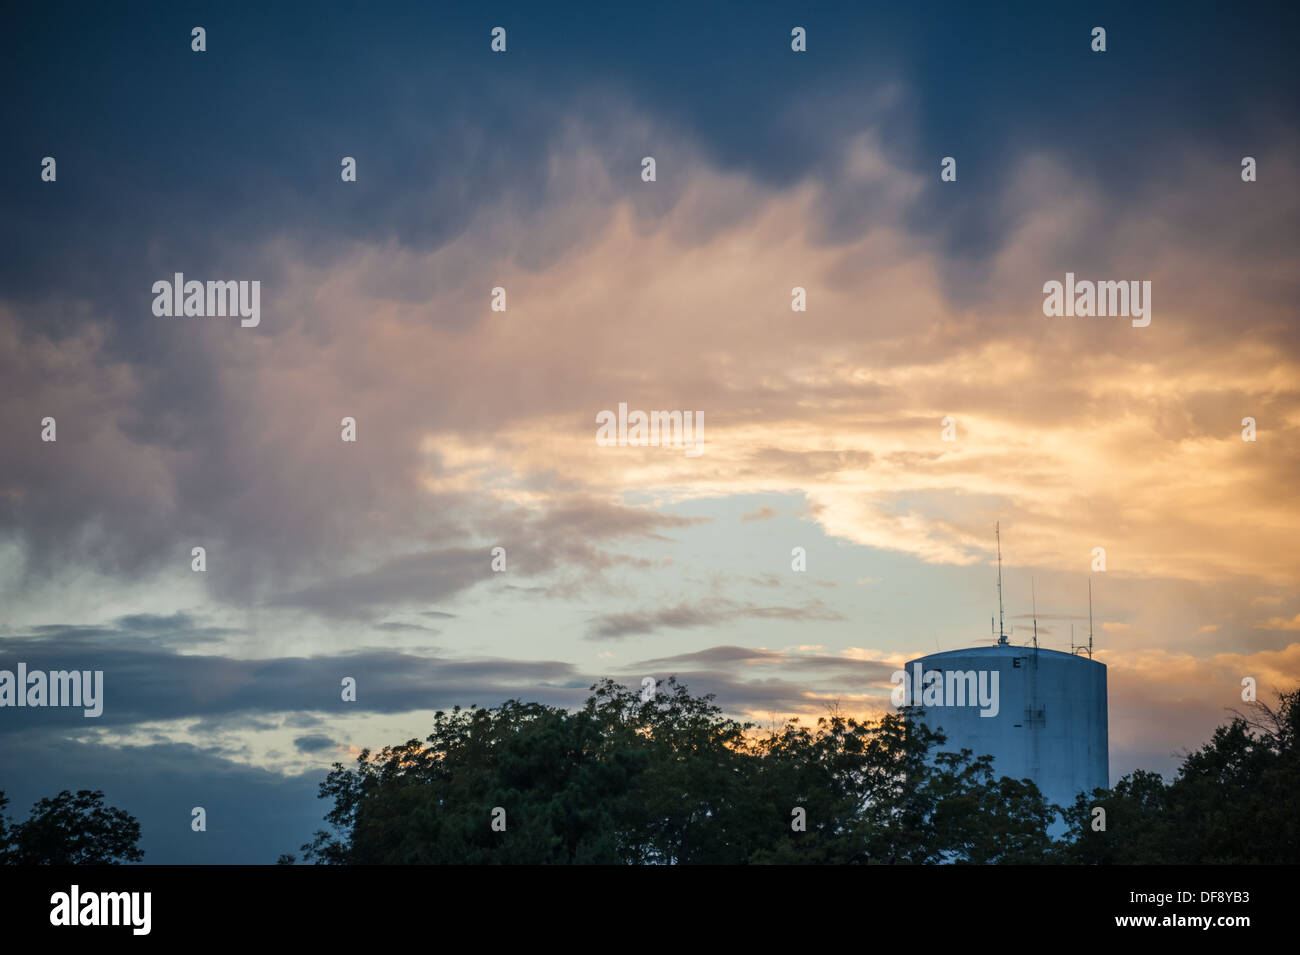 Dramatic sunset sky over a city water tower in Lawrenceville, Georgia. (USA). Stock Photo